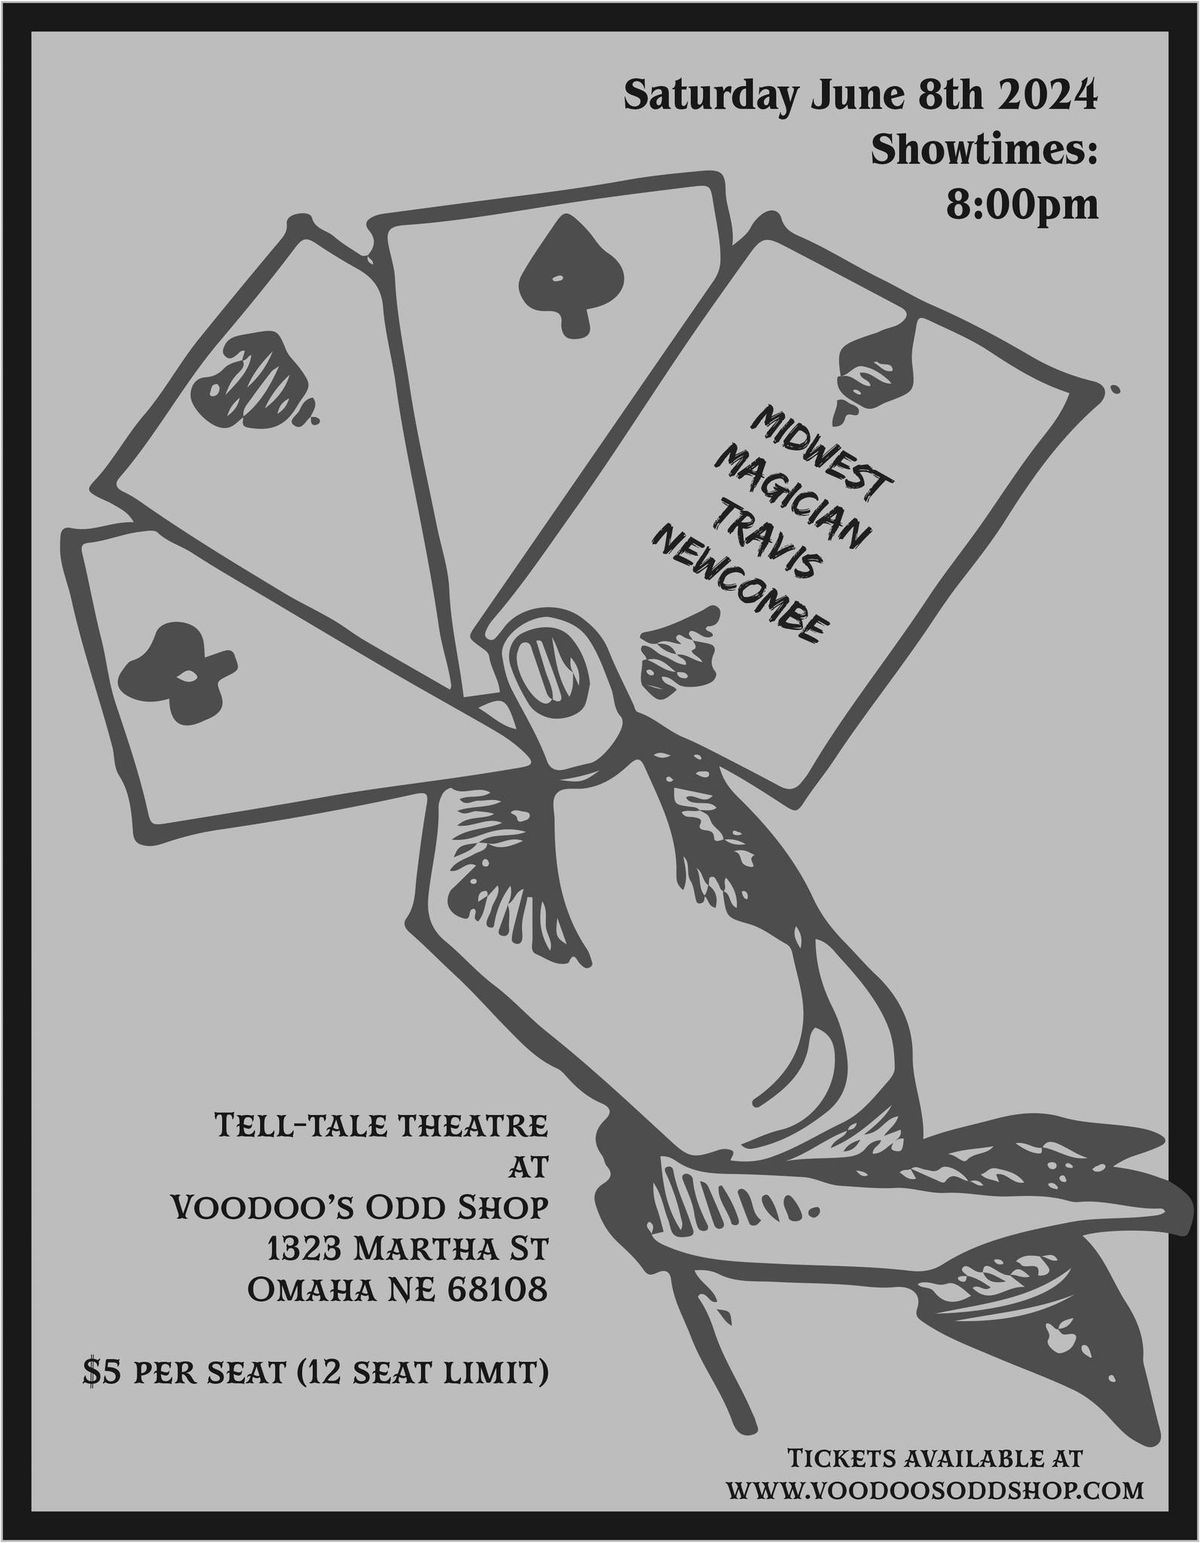 Midwest Magician at Tell-tale Theatre (VOS)